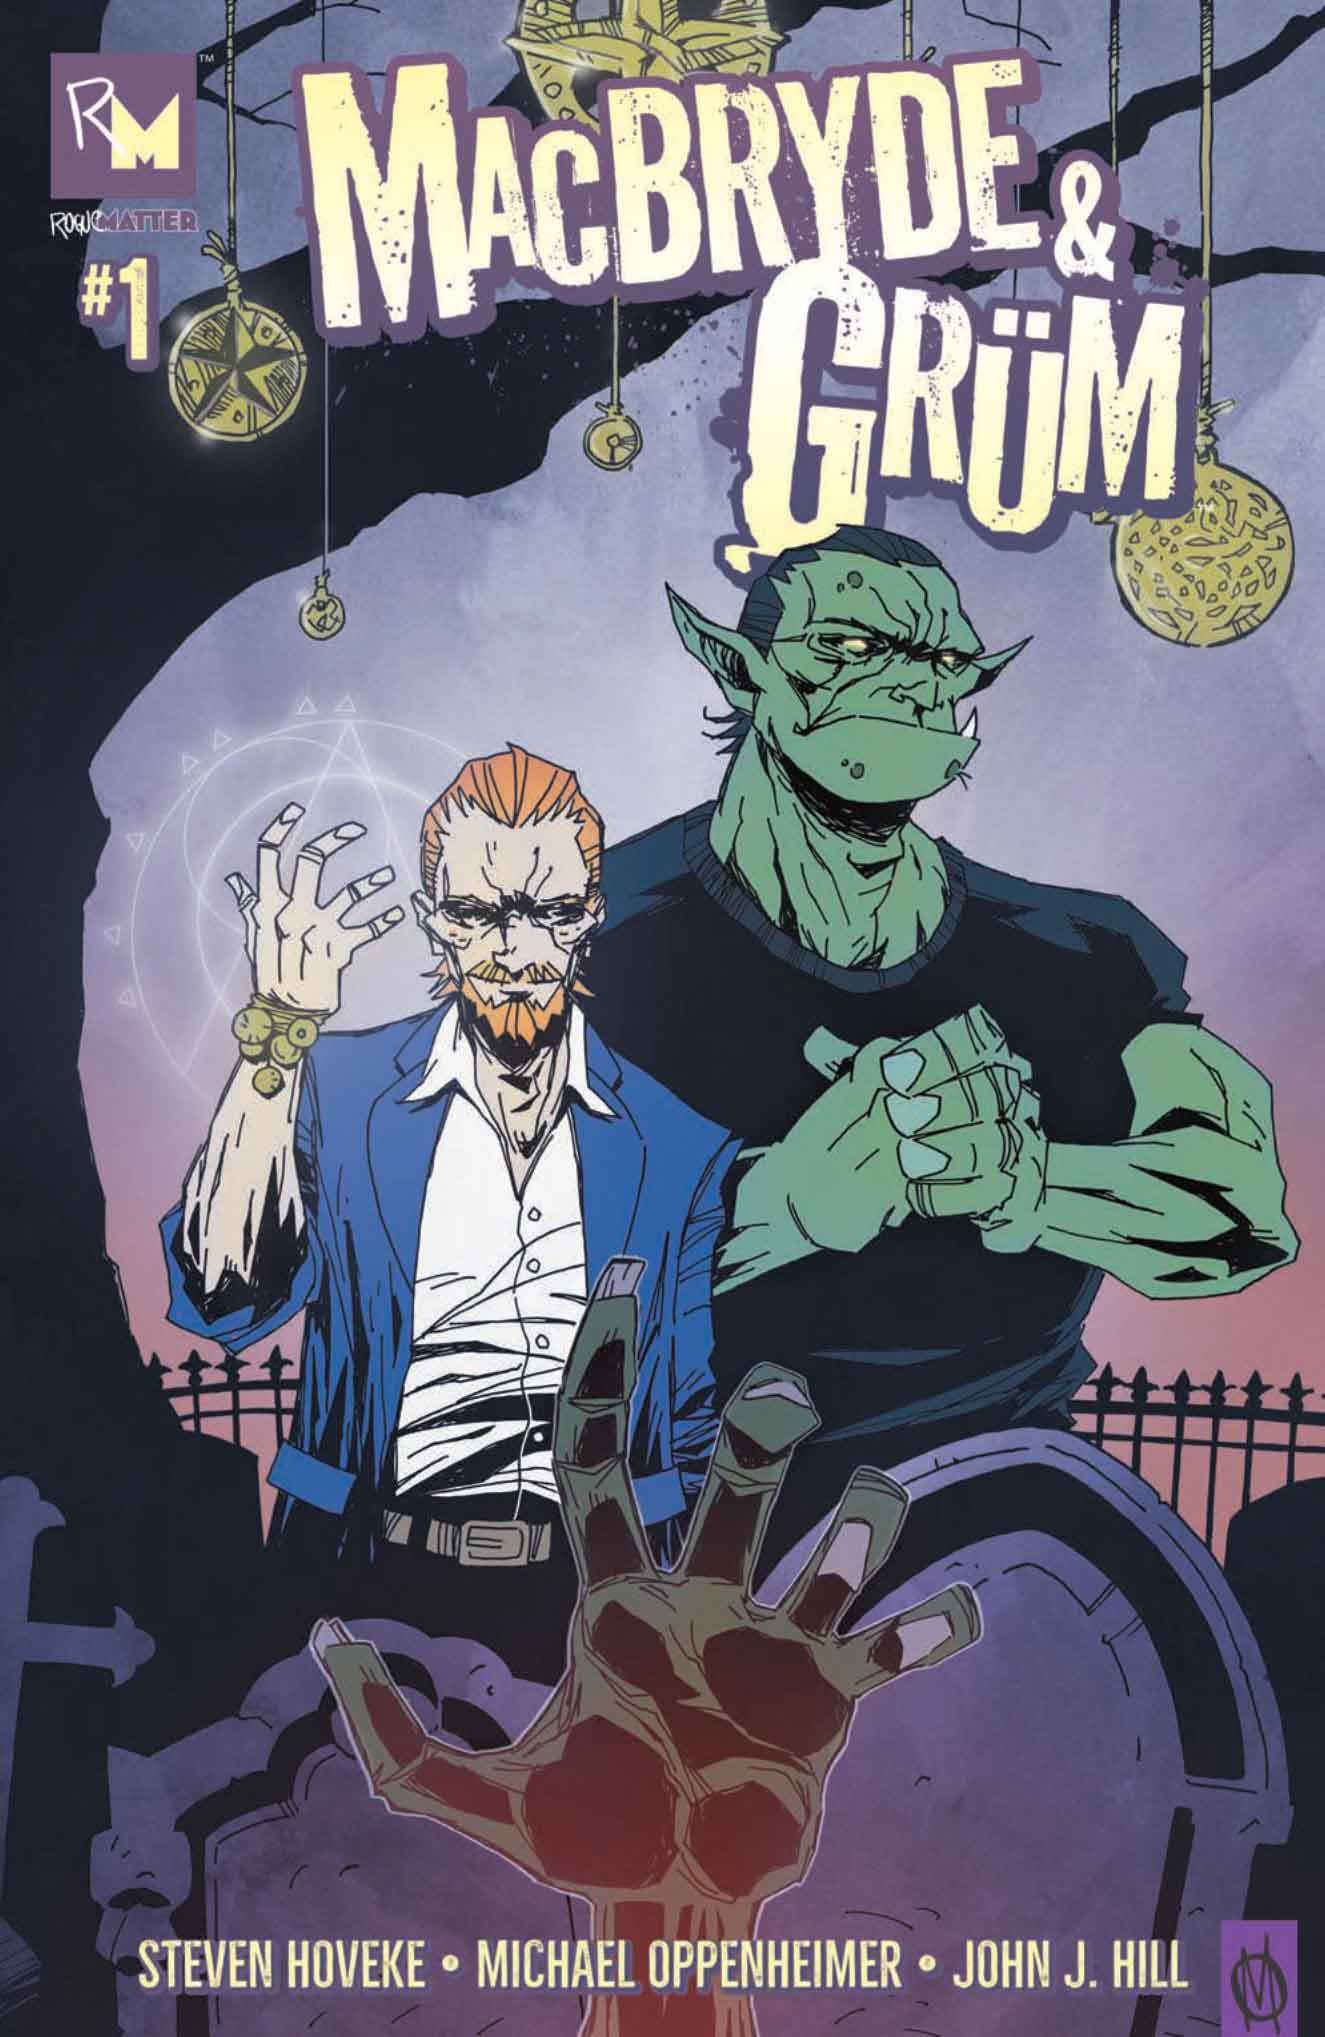 MacBryde & Grum Vol 1 by 'Steven Hoveke, Michael Oppeneimer, Joyhn J. Hill'. A comic book cover featuring the title, MacBryde & Grum, with vibrant artwork and characters.